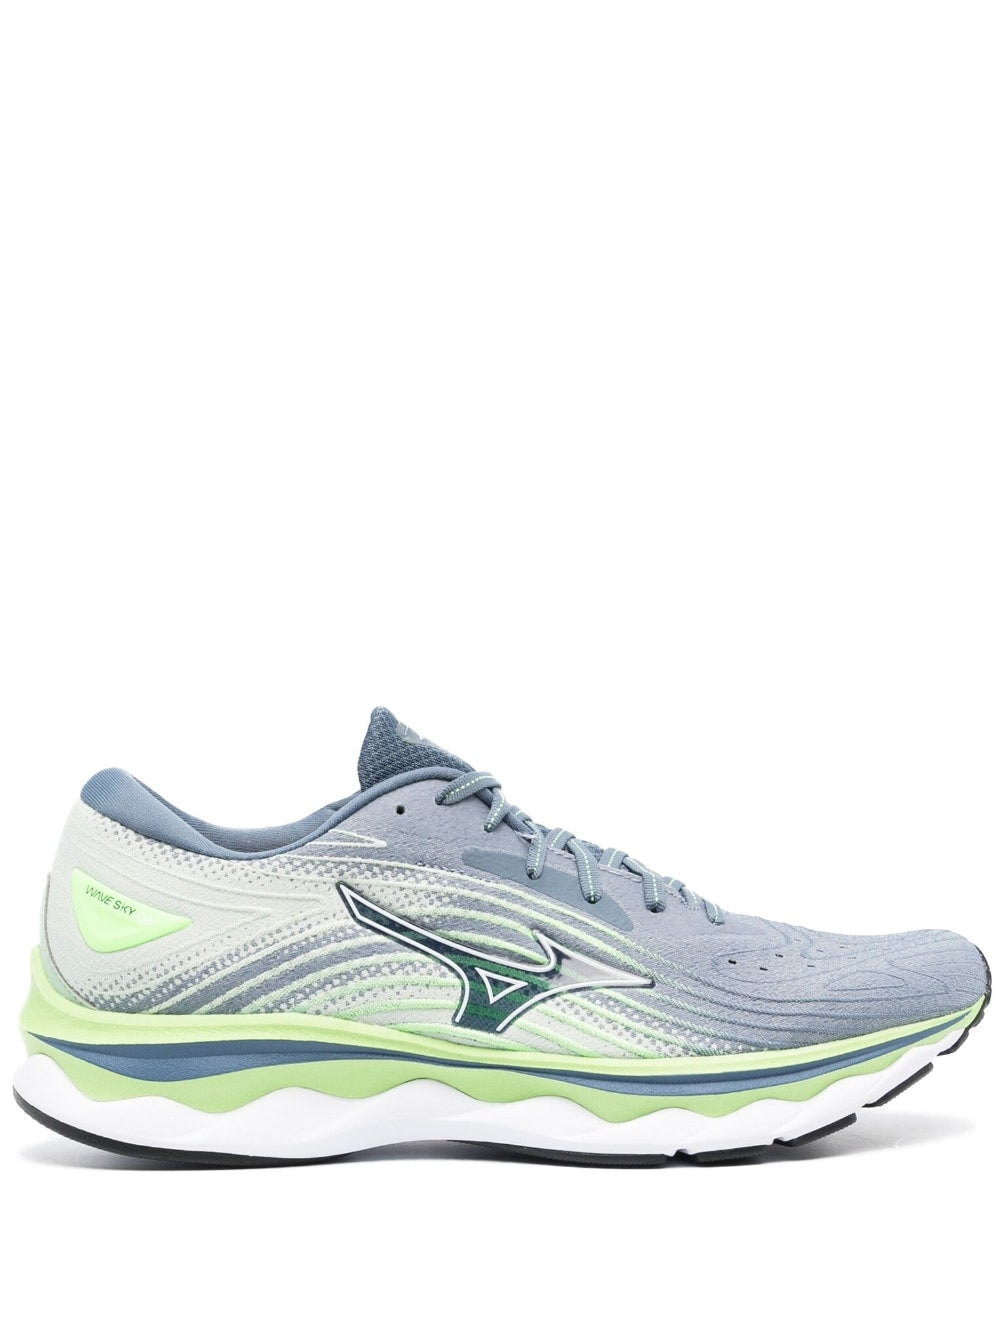 Grey/green Wave sky 6 running shoes